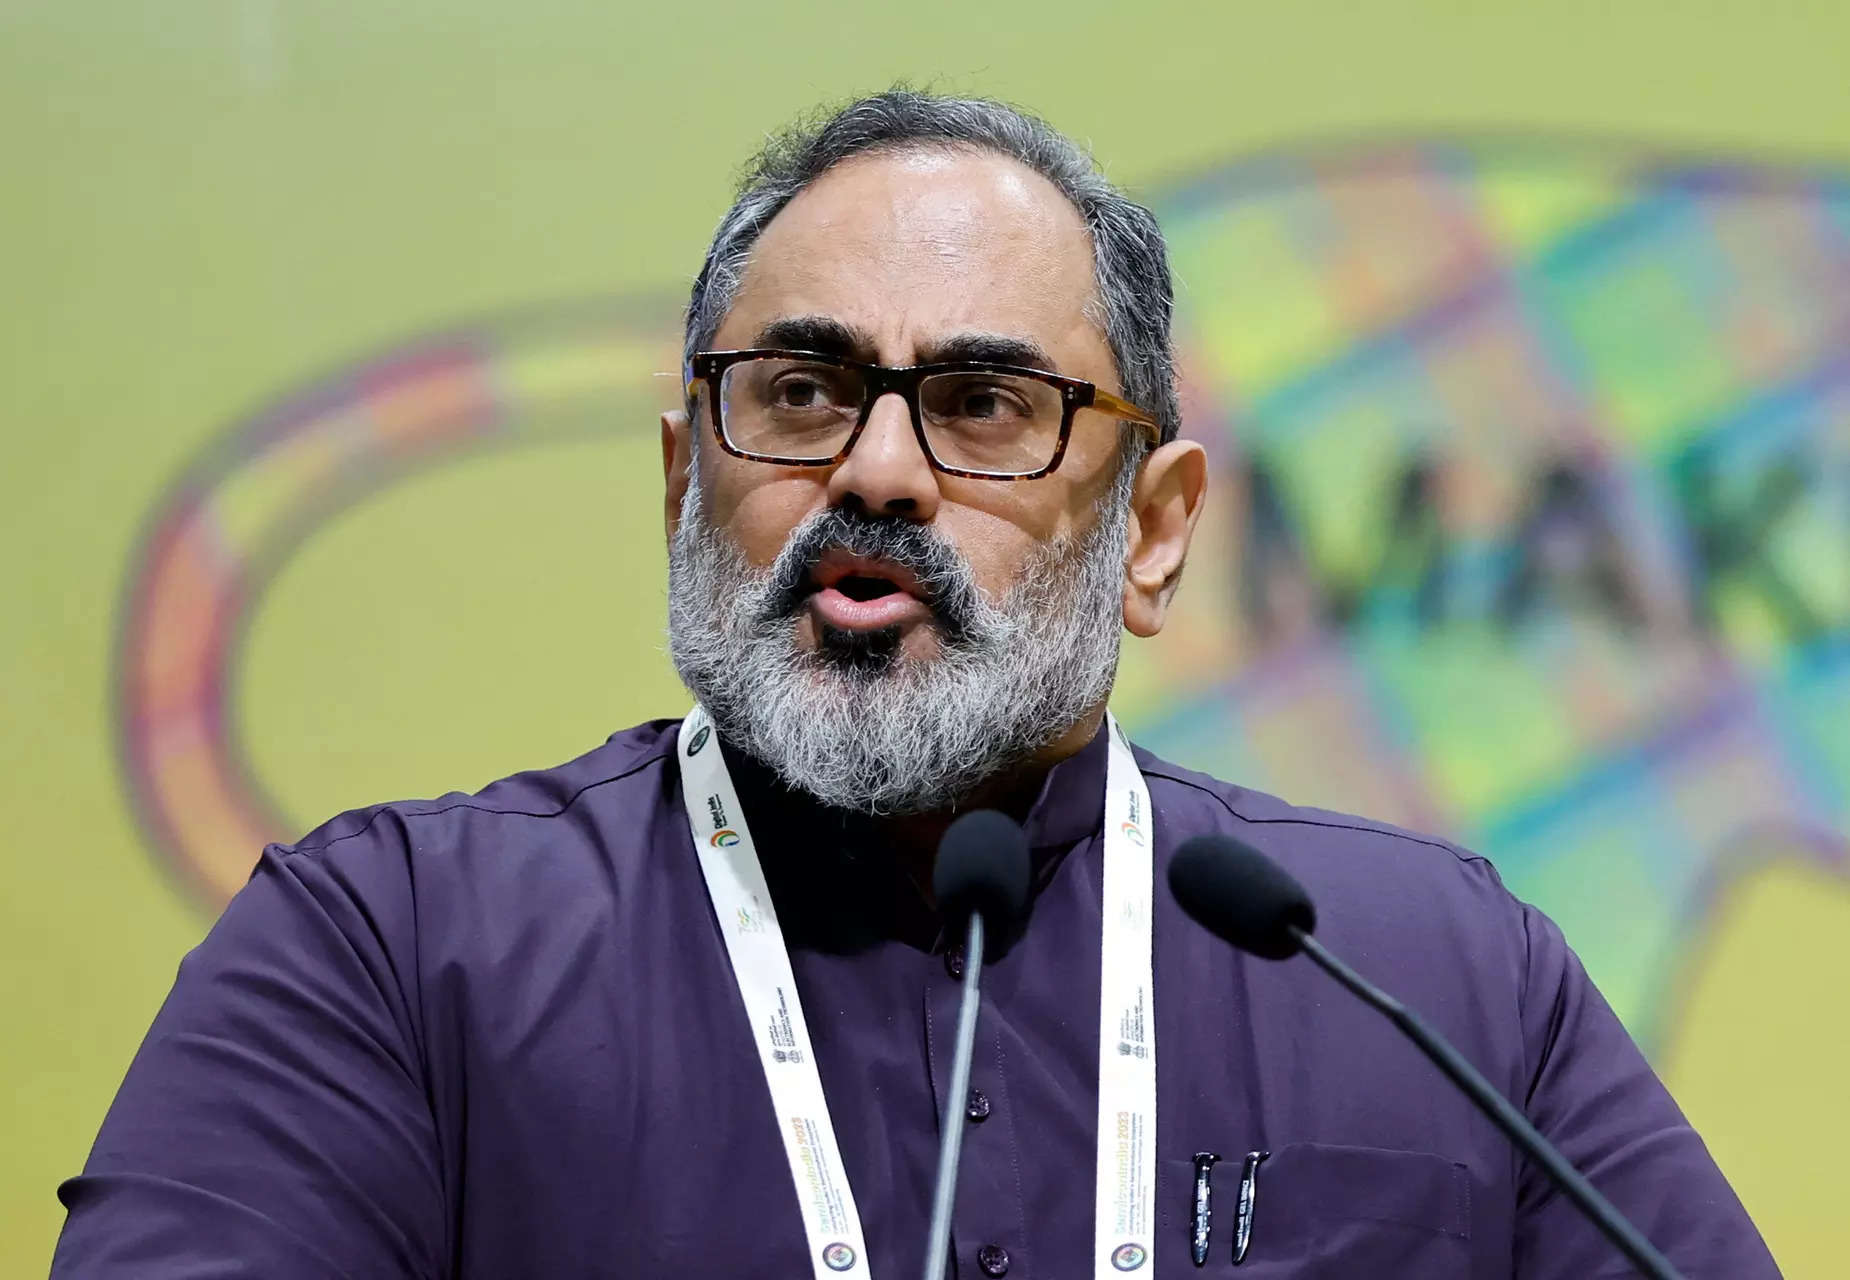 minister of state for electronics and information technology Rajeev Chandrasekhar